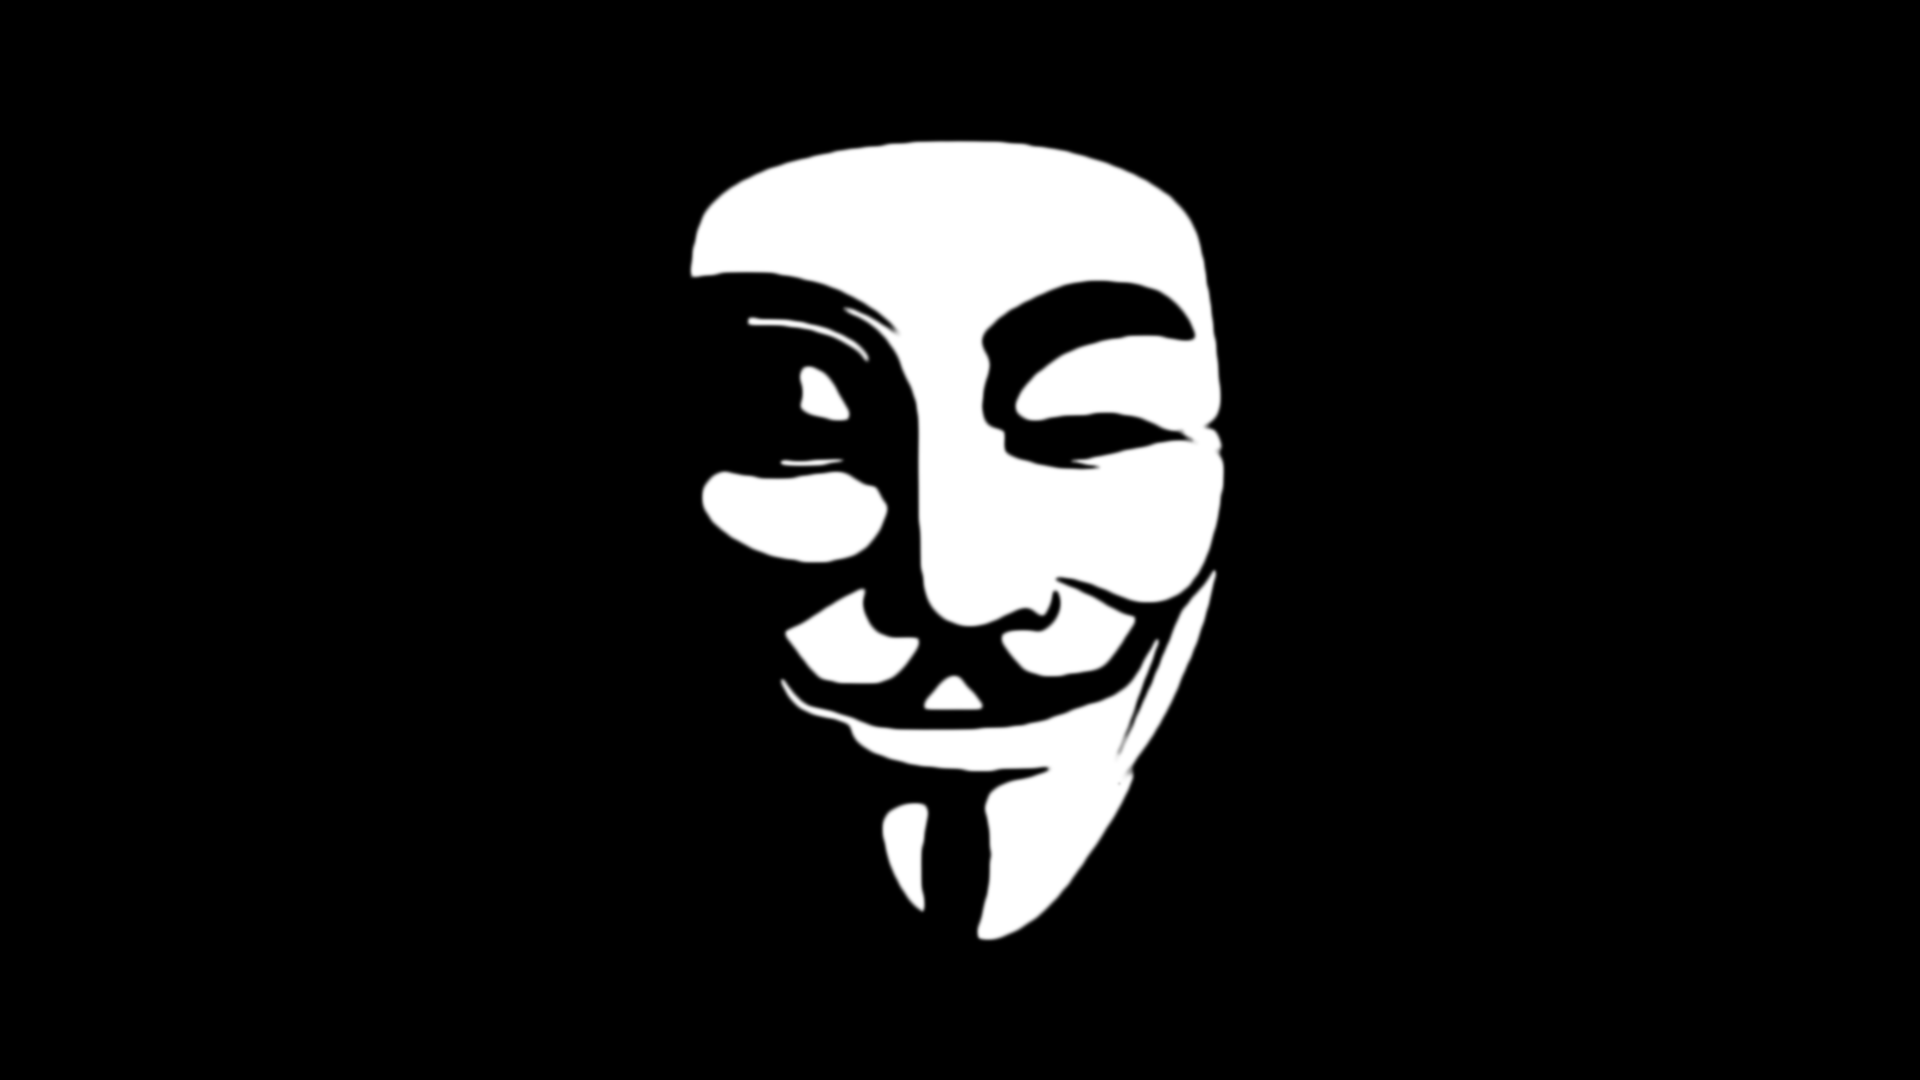 Download 64k Ultra HD Hacker Group Anonymous Mask Wallpaper | Wallpapers.com